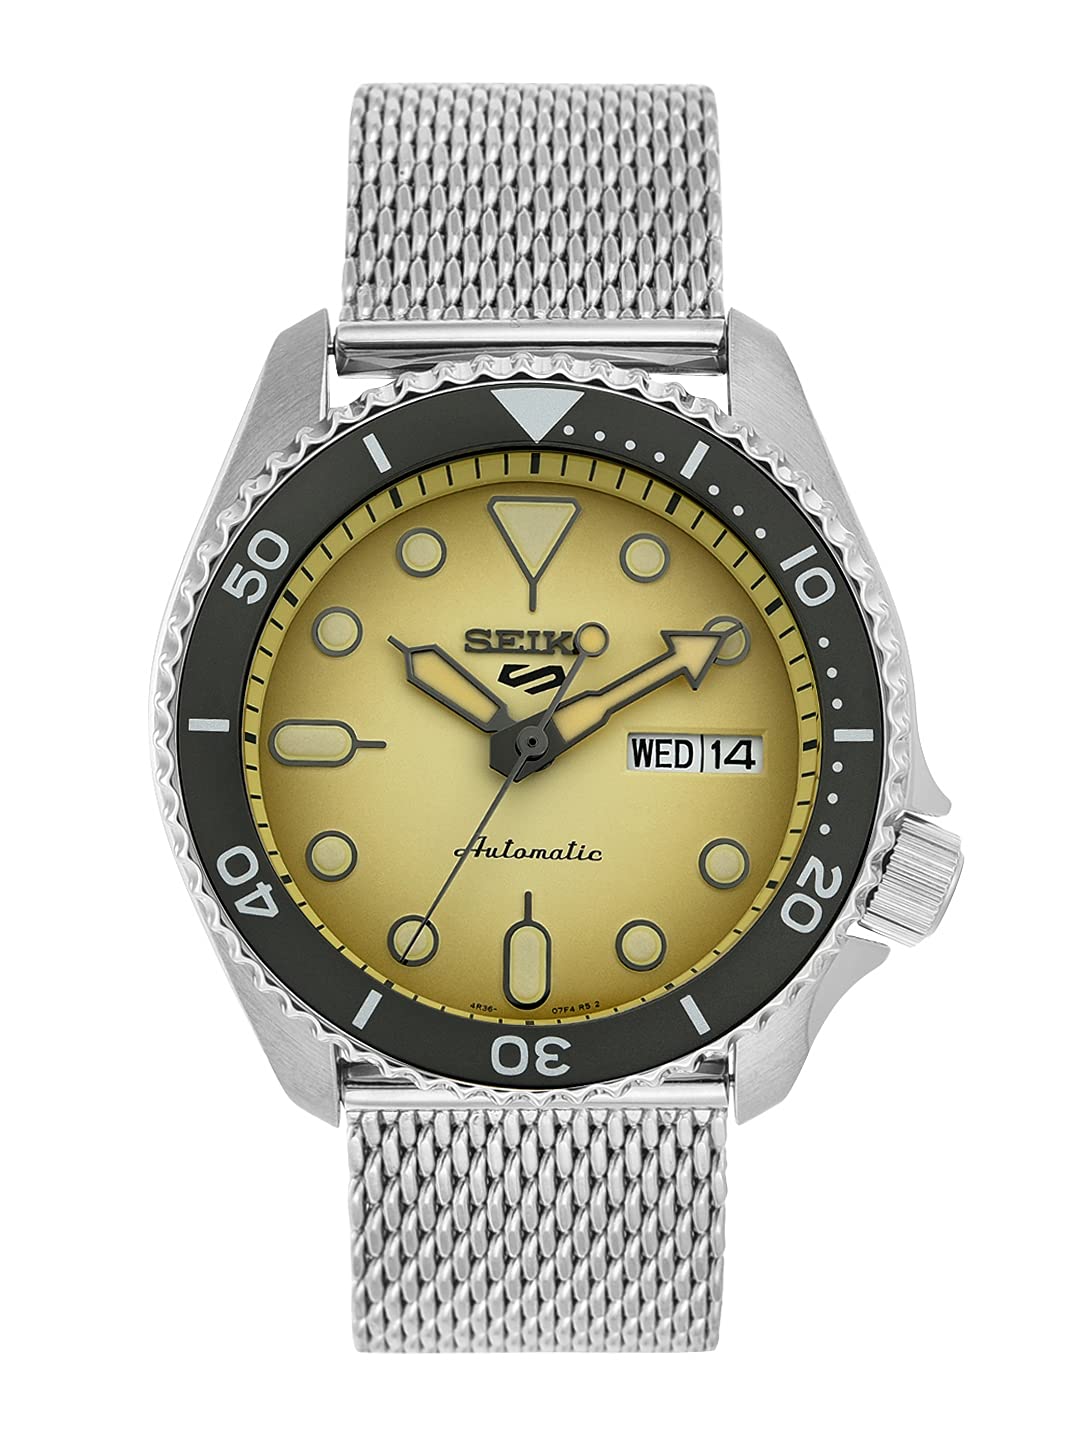 Seiko Men's Analogue Automatic Watch with Stainless Steel Strap SRPD67K1